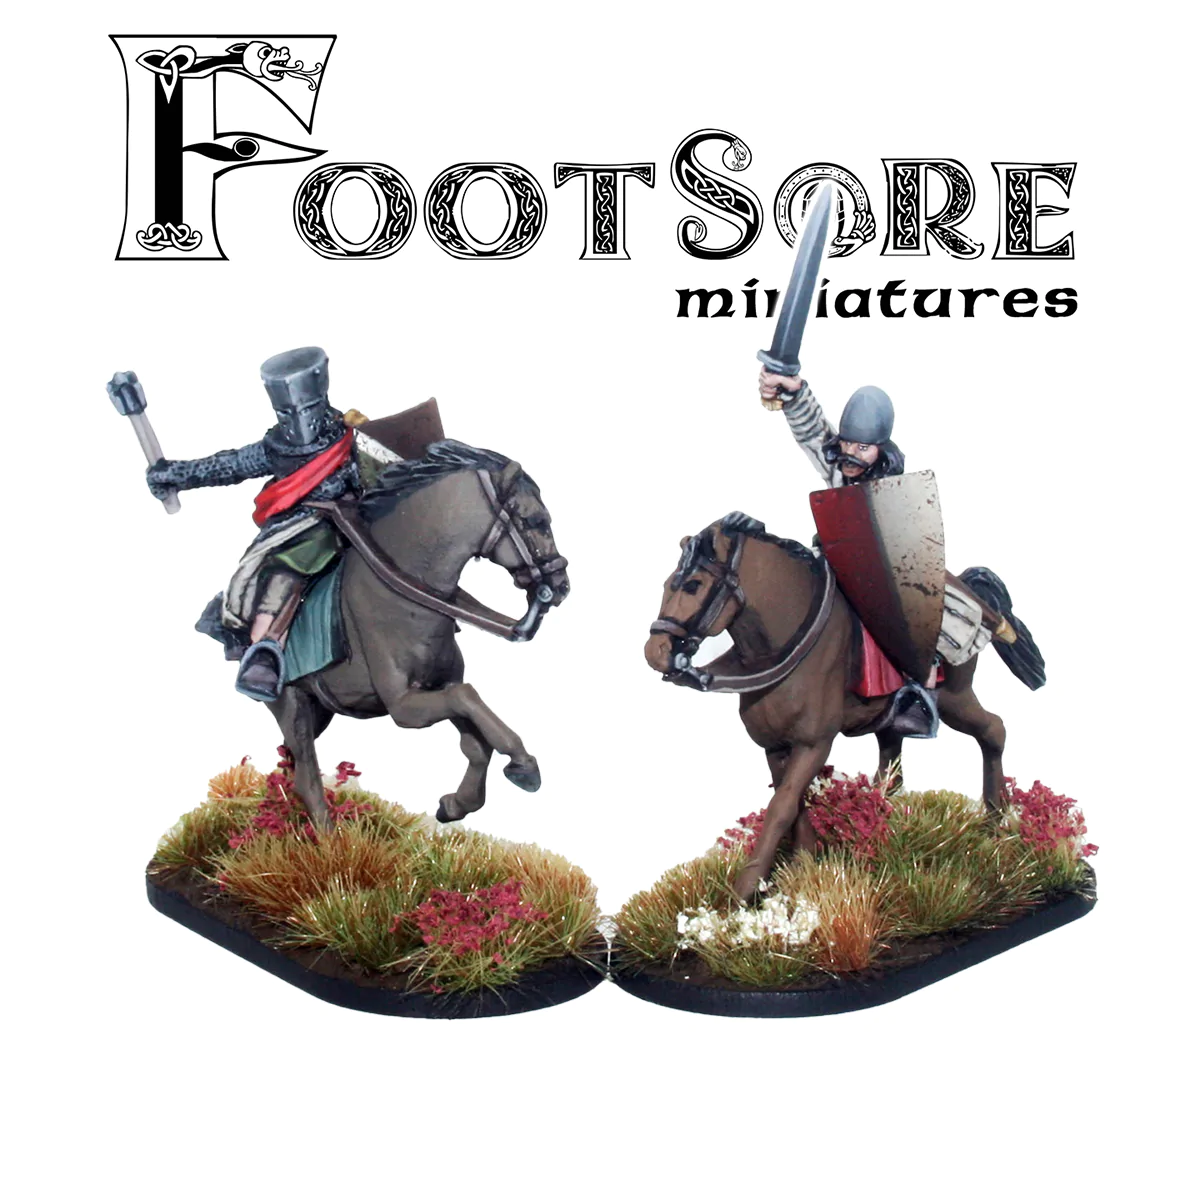 Footsore Miniatures WLS204 Welsh Medieval Cavalry with Hand Weapons